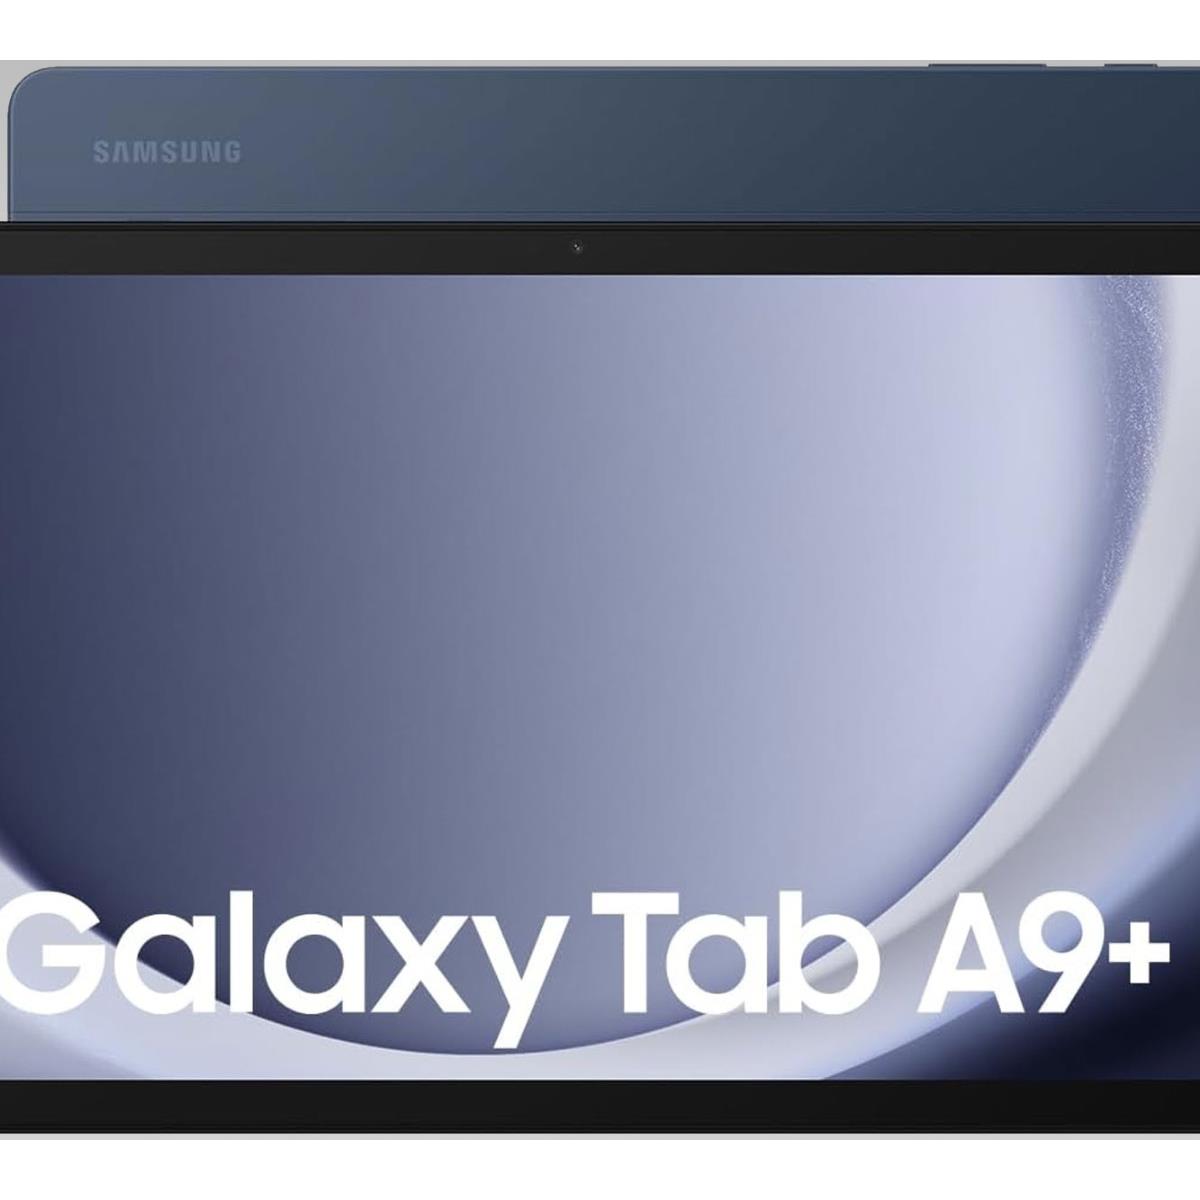 Samsung Galaxy Tab A9 Plus leaks with 5G modem and 90 Hz display -   News